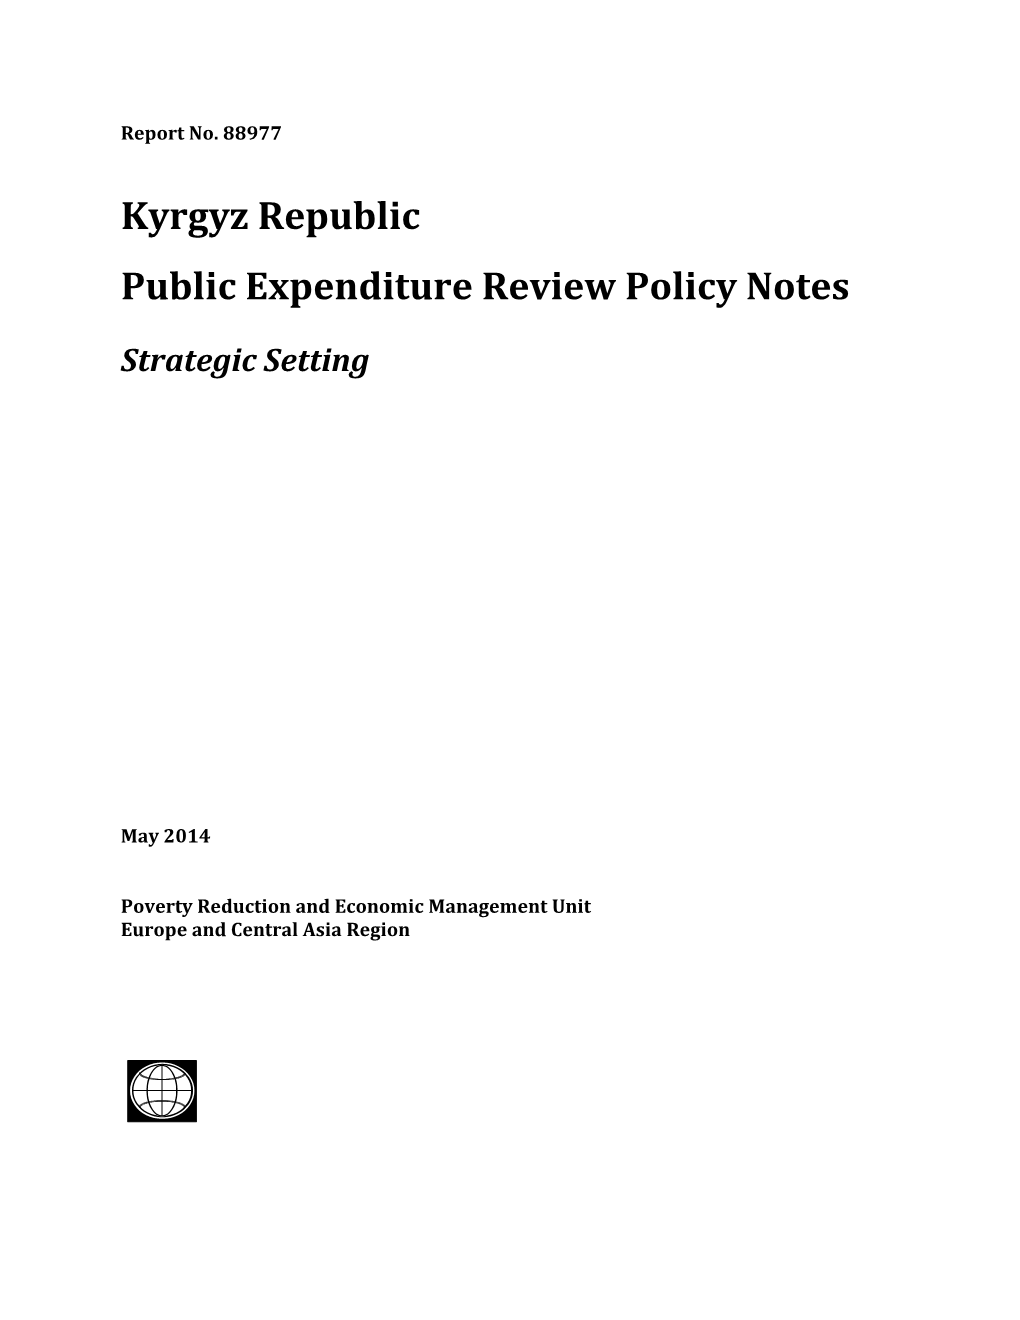 Public Expenditure Review Policy Notes